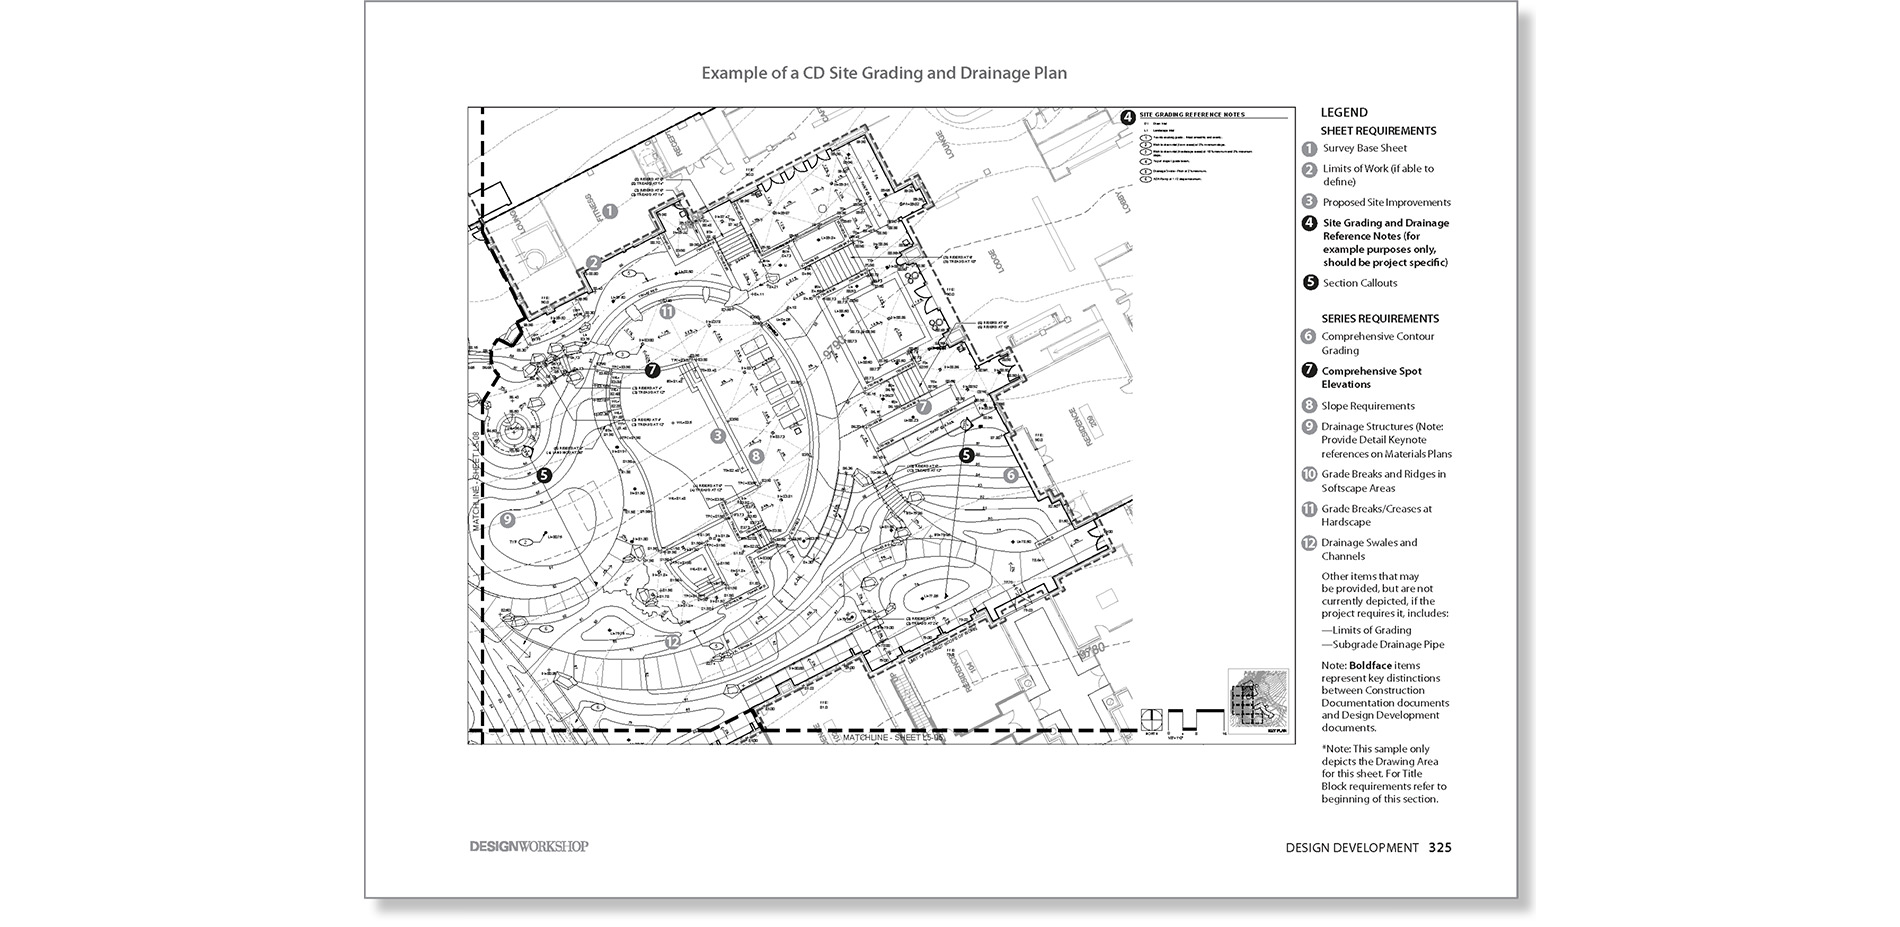 Site Grading and Drainage Plan Example